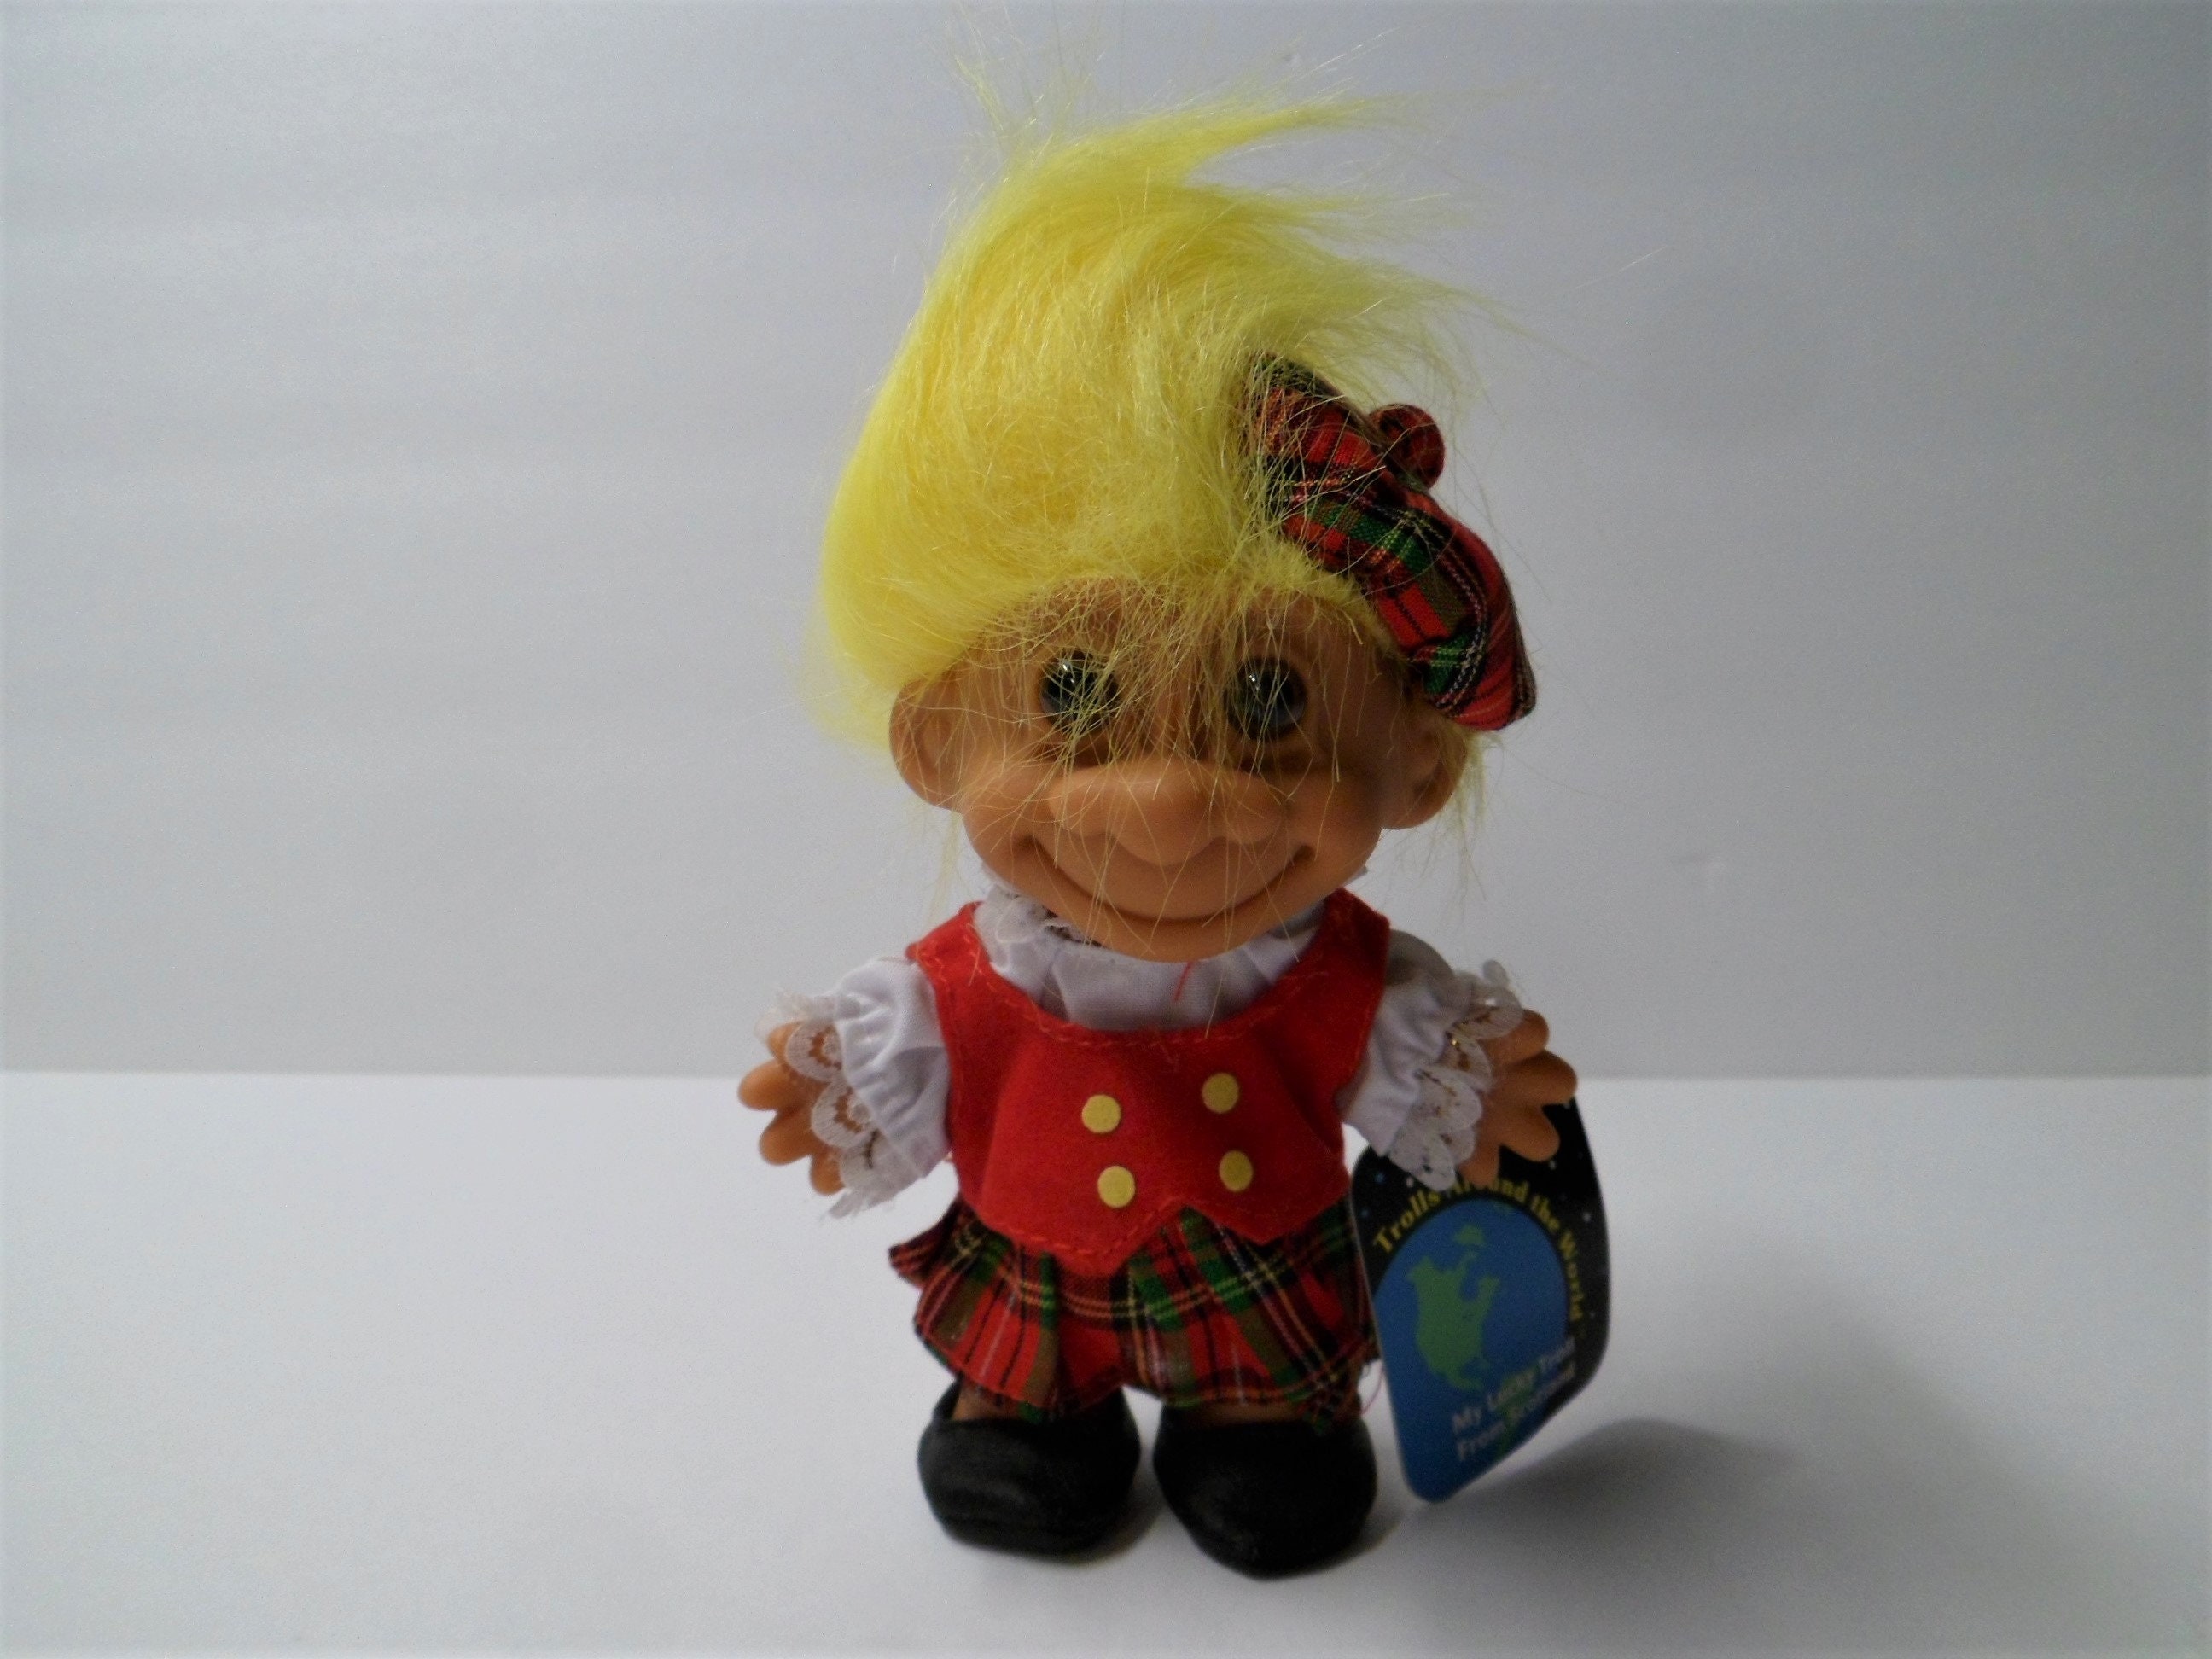 5" Russ Troll  Doll MONTHLY SPECIAL NINJA NEW IN ORIGINAL WRAPPER Rare 